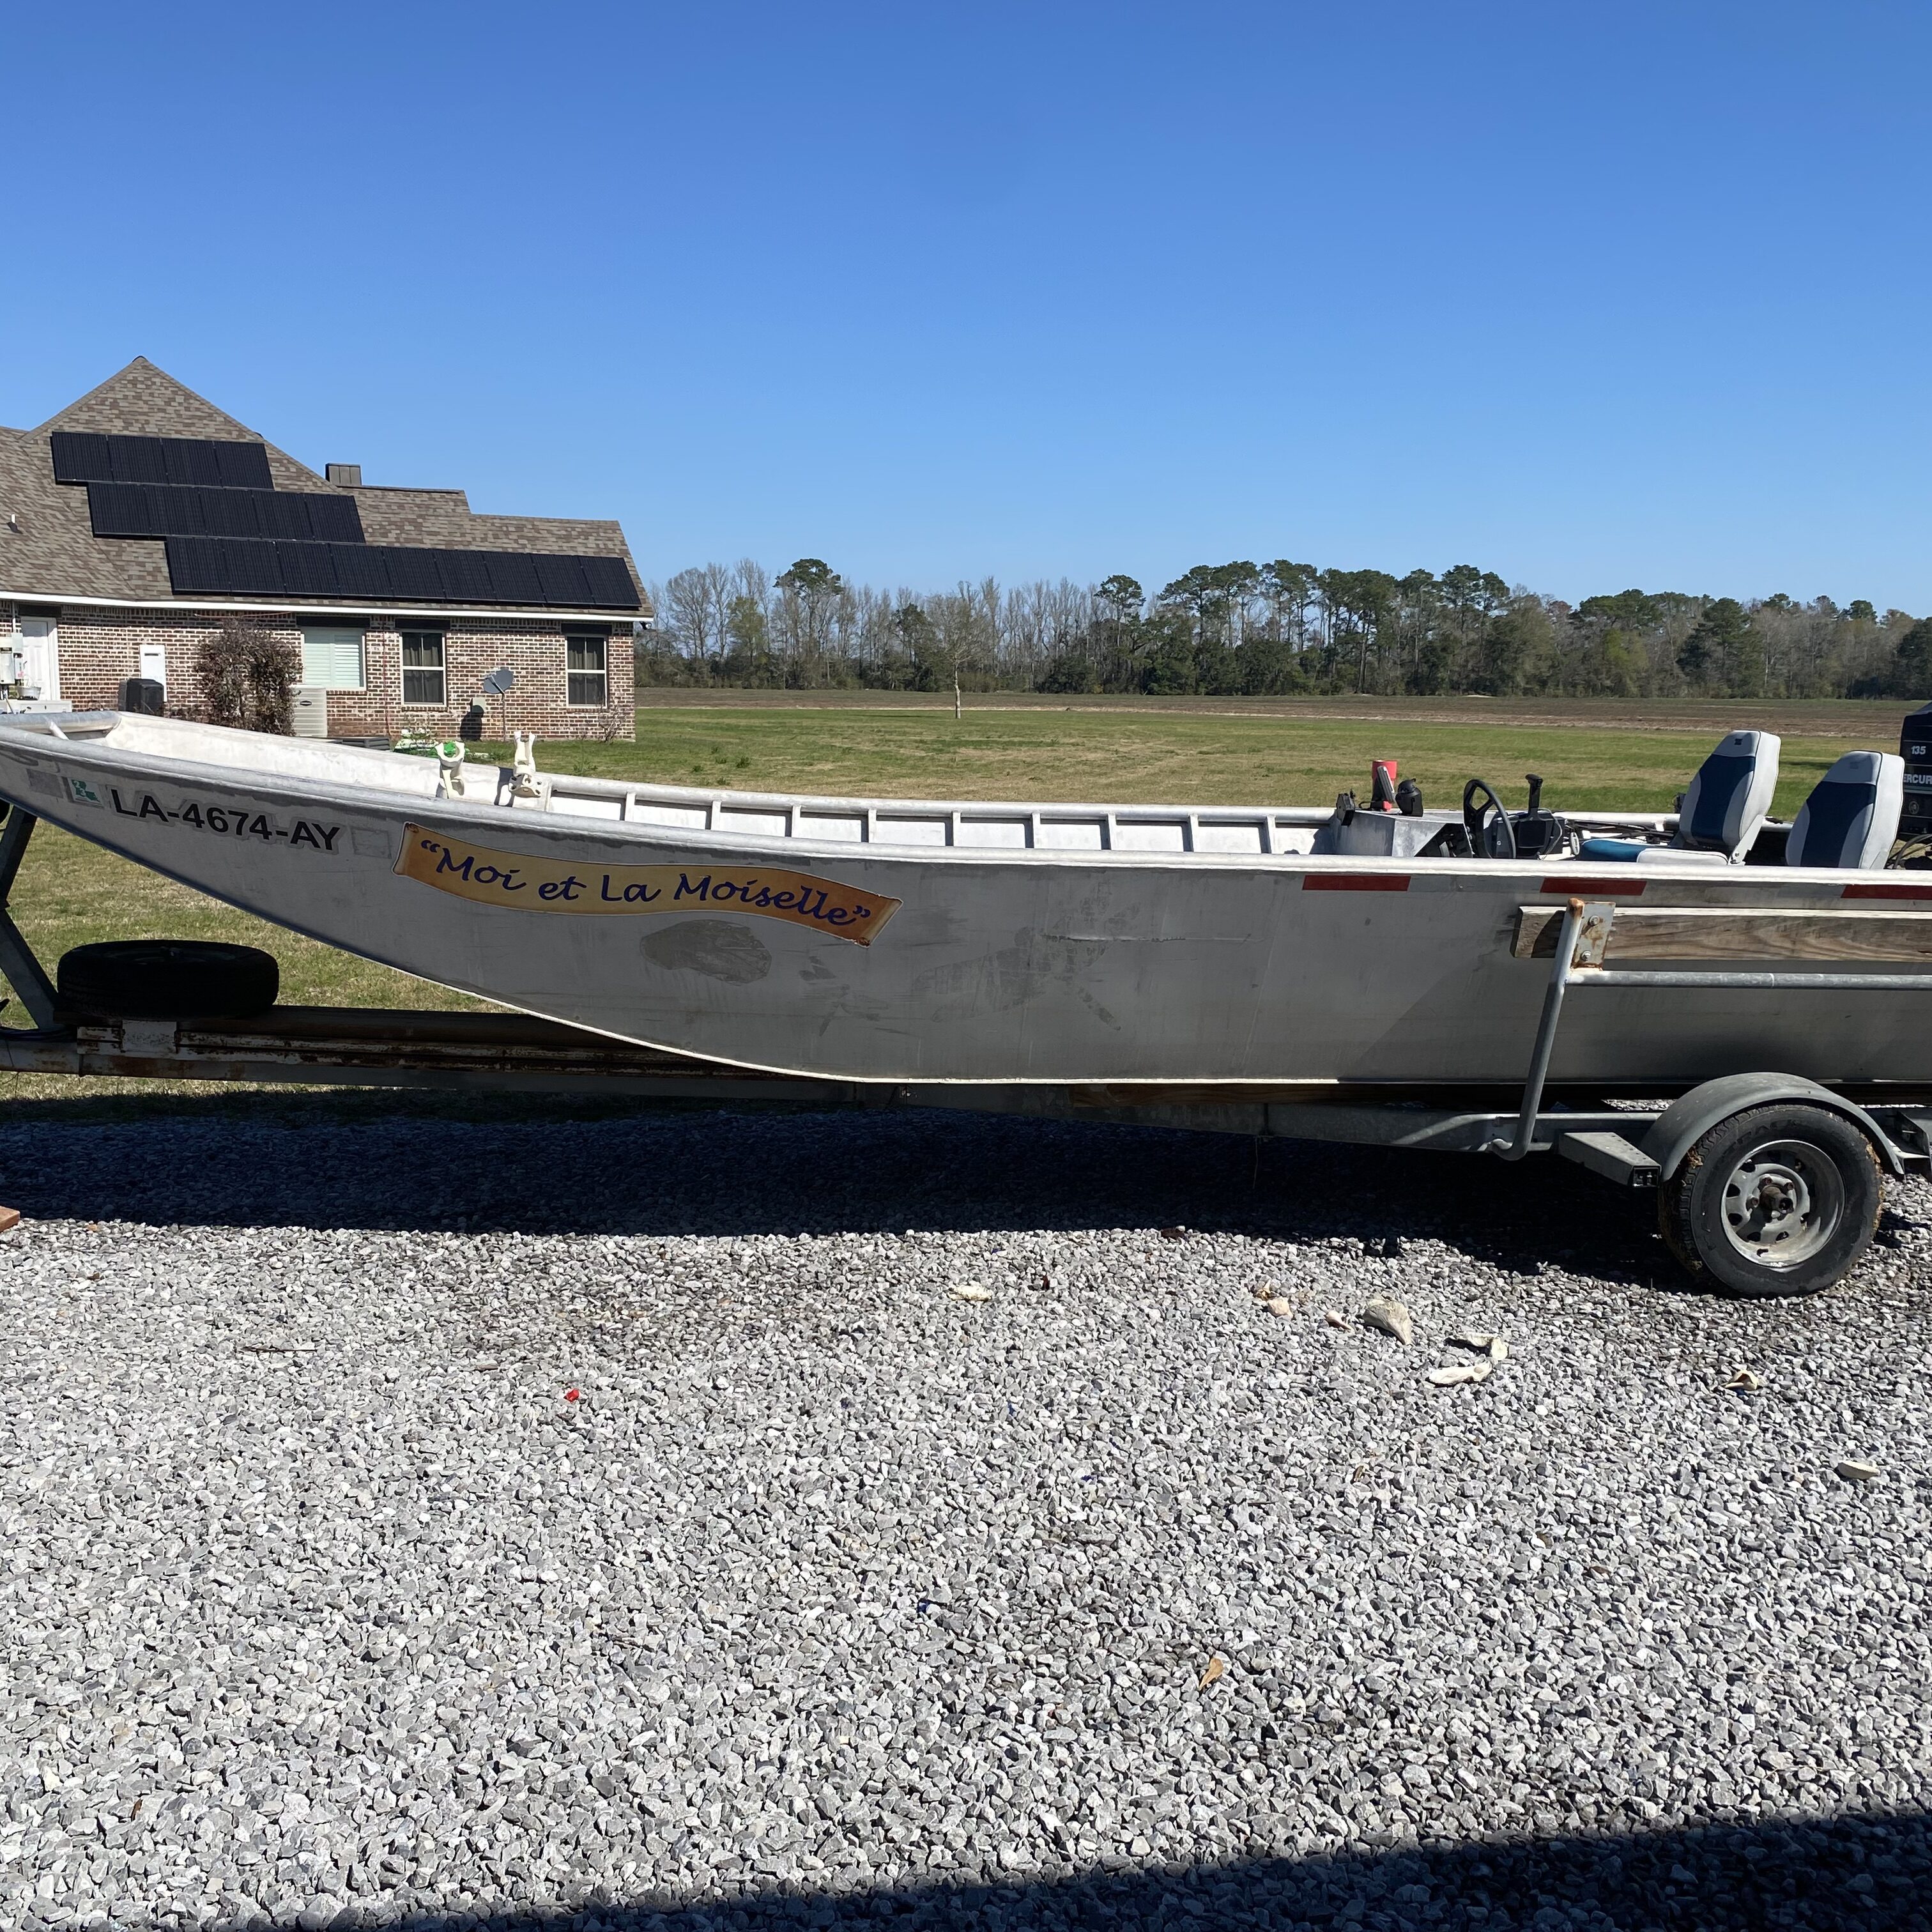 20 foot solid fabrication boat. Sturdy. Motor runs great Price negotiable